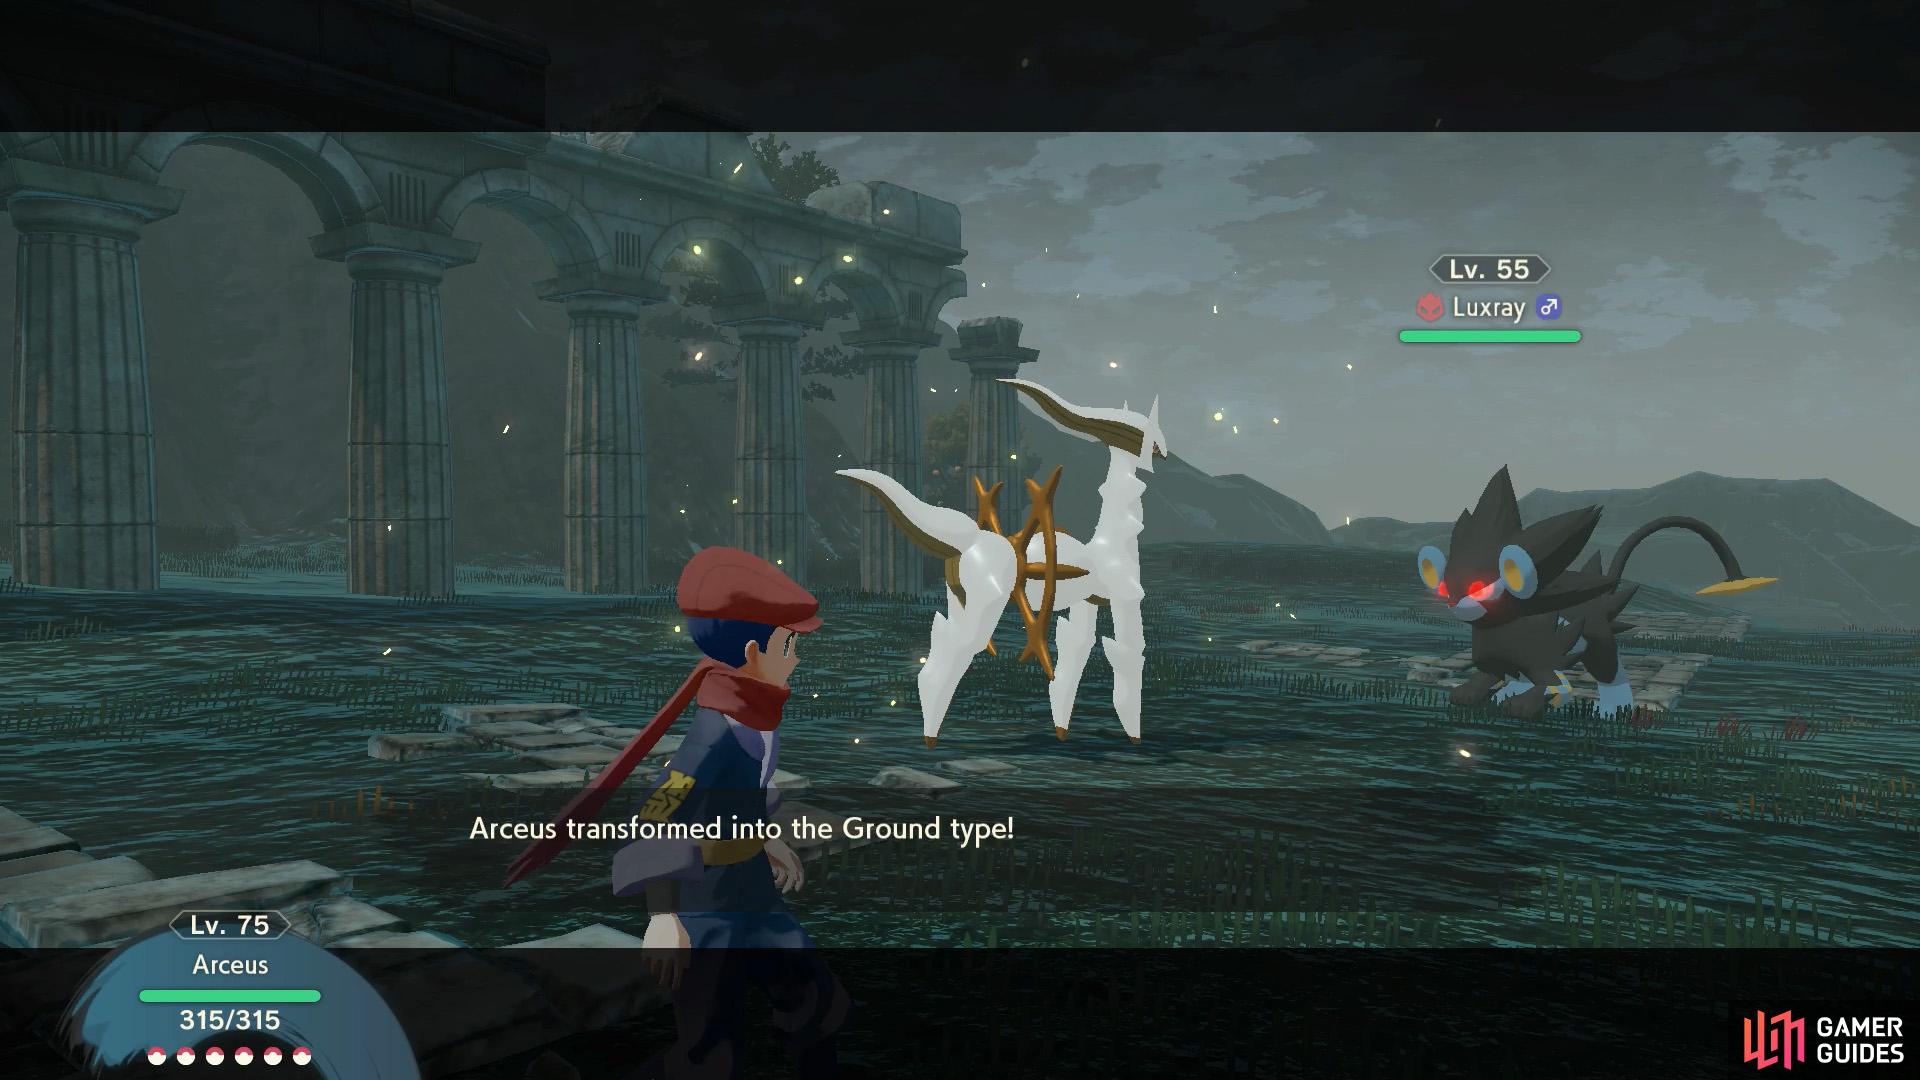 Now Arceus will shift types when using Judgement, somewhat similar to Greninja's Protean.